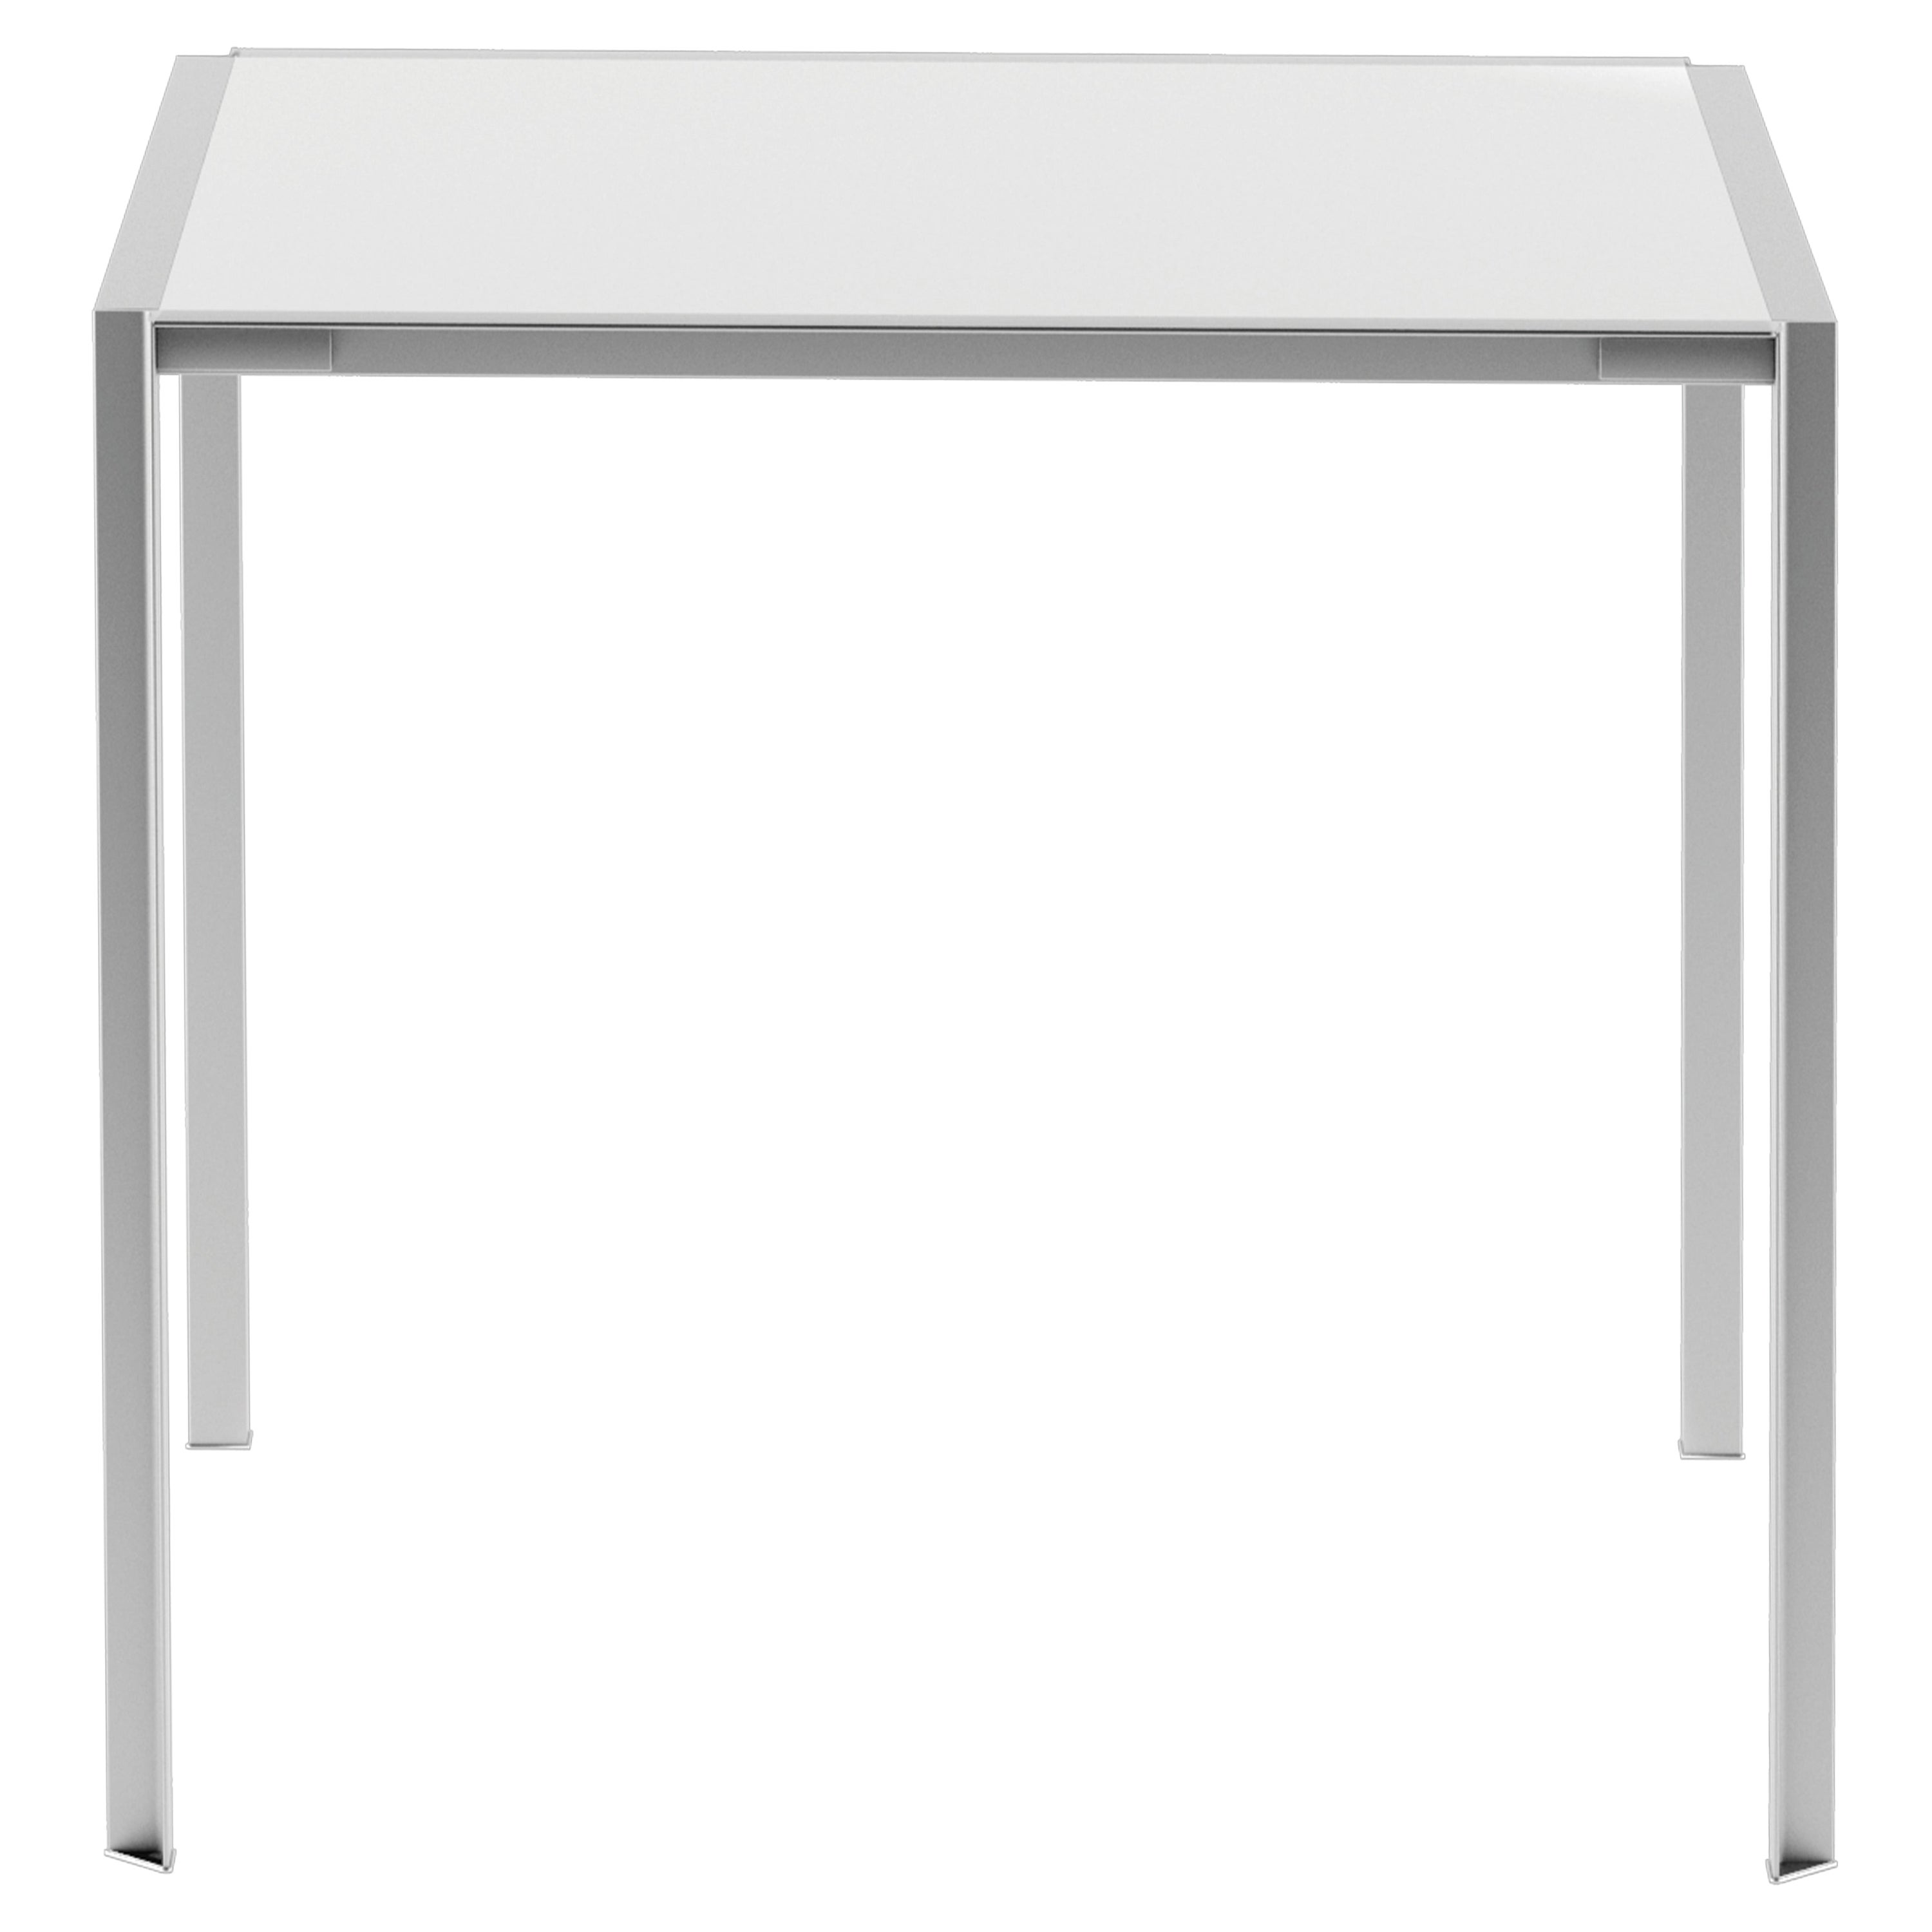 Alias 227_O Green Table 80x80 with Brushed Stainless Steel Frame and Dekton Top 